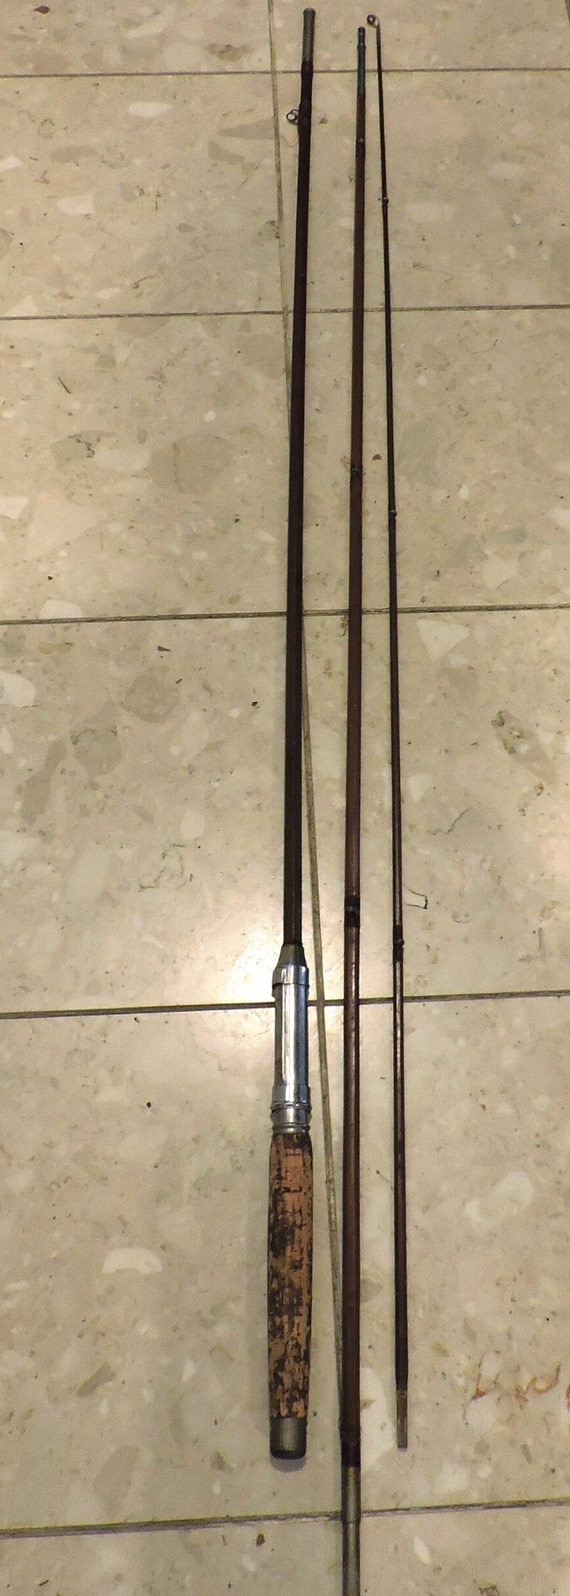 TWO-PIECE BAMBOO SPINNING Rod by Horrocks-Ibbotson for parts